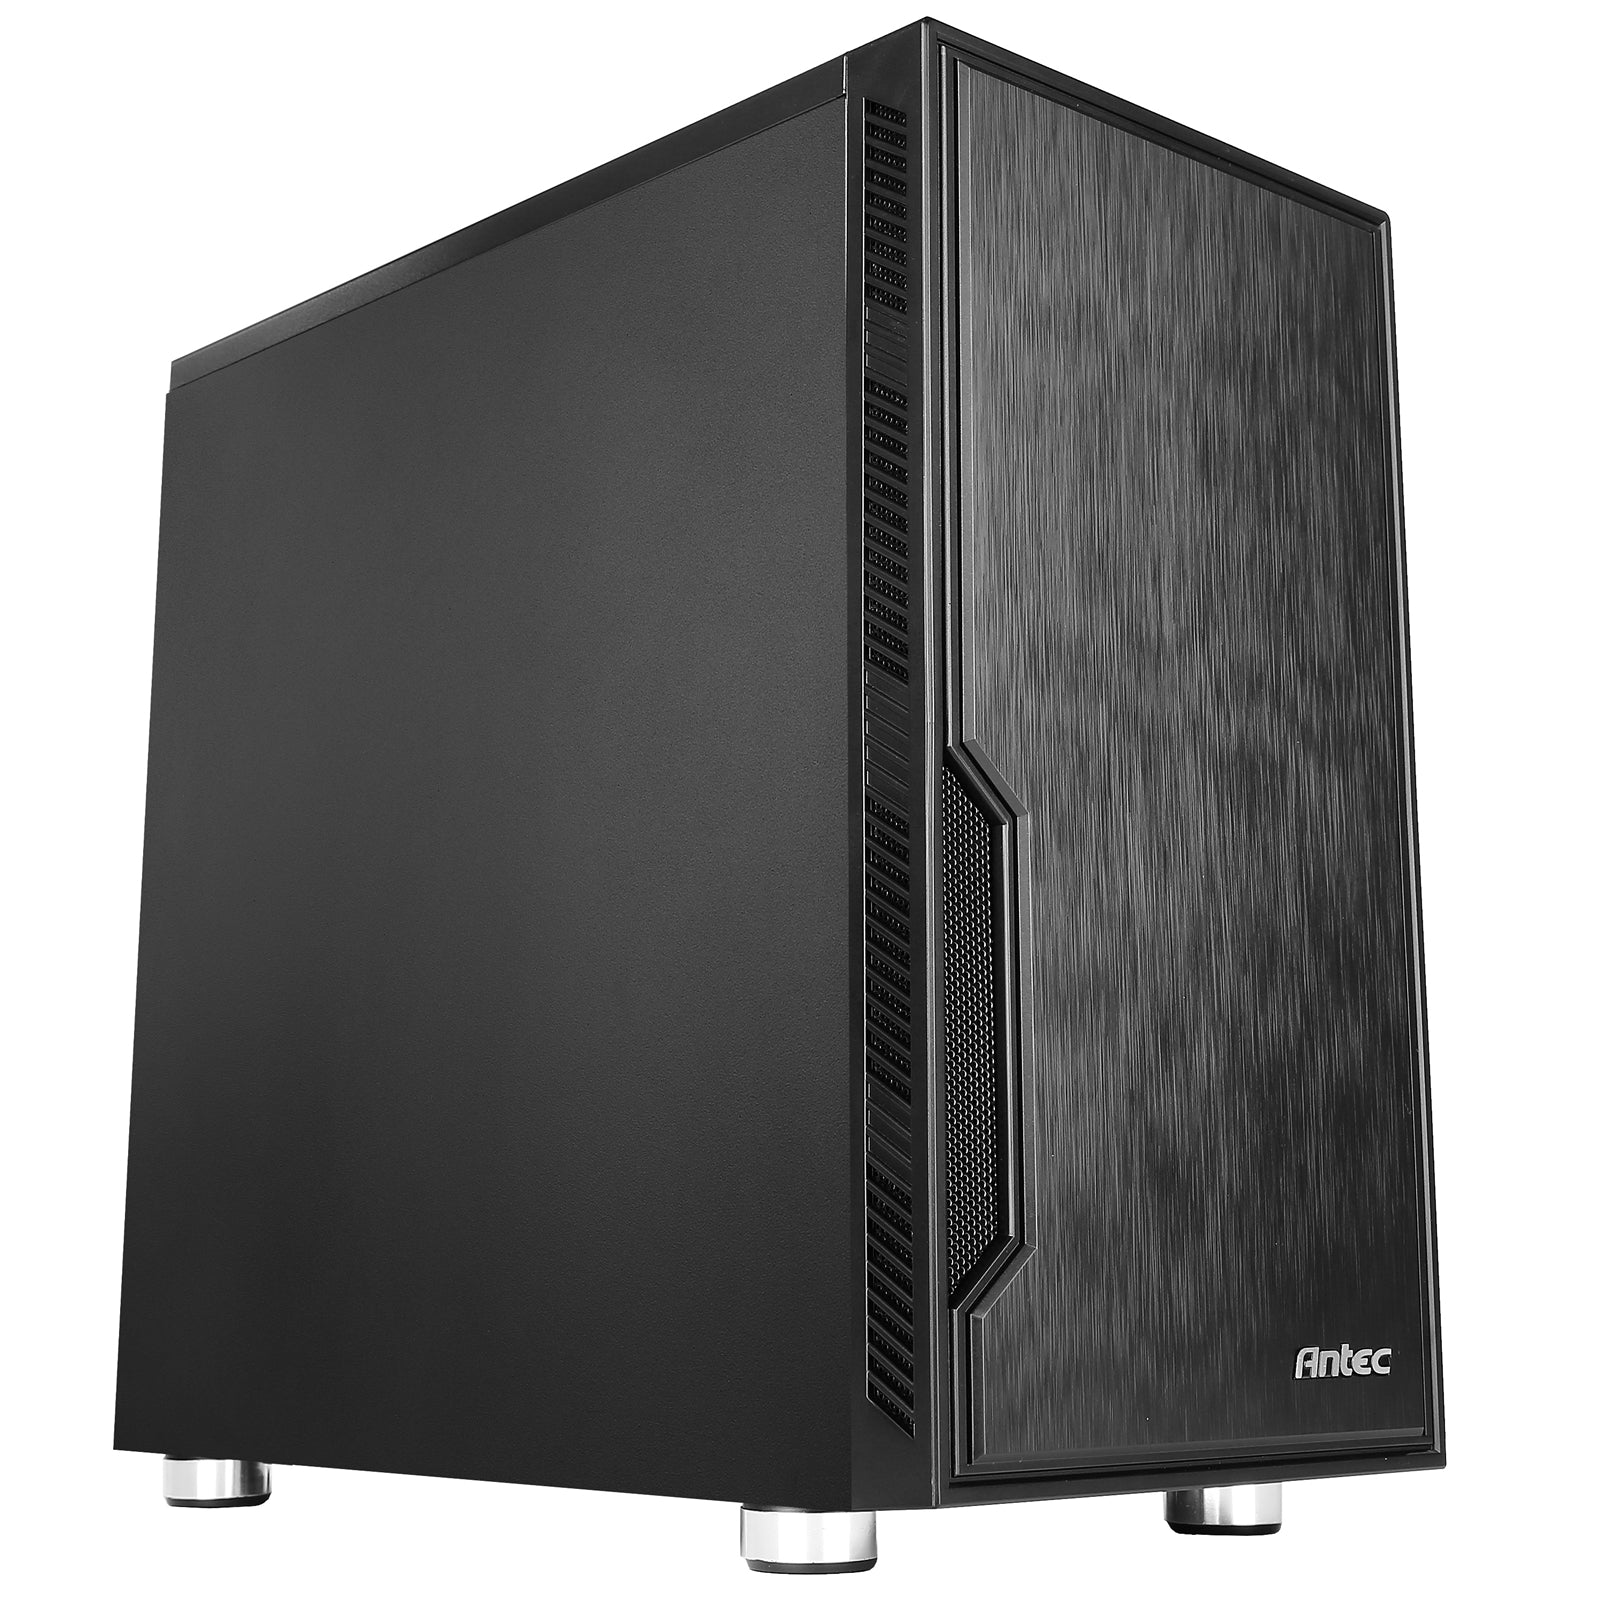 ANTEC VSK 10 Micro Tower Case Optimal Cooling & Airflow for Home & Business